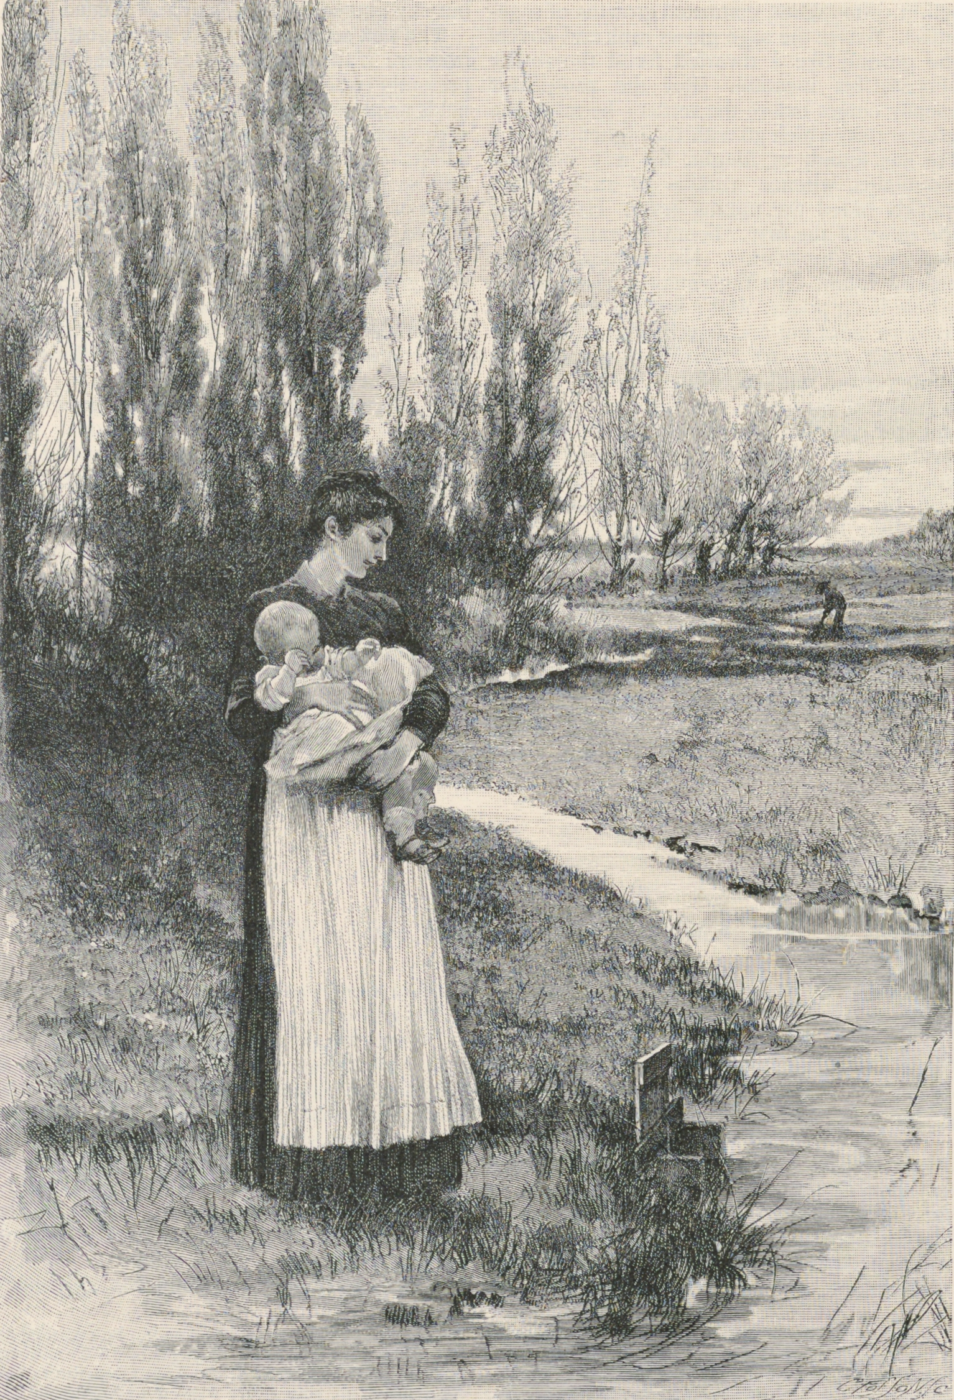 Image features a woman standing beside an irrigation ditch holding a baby.